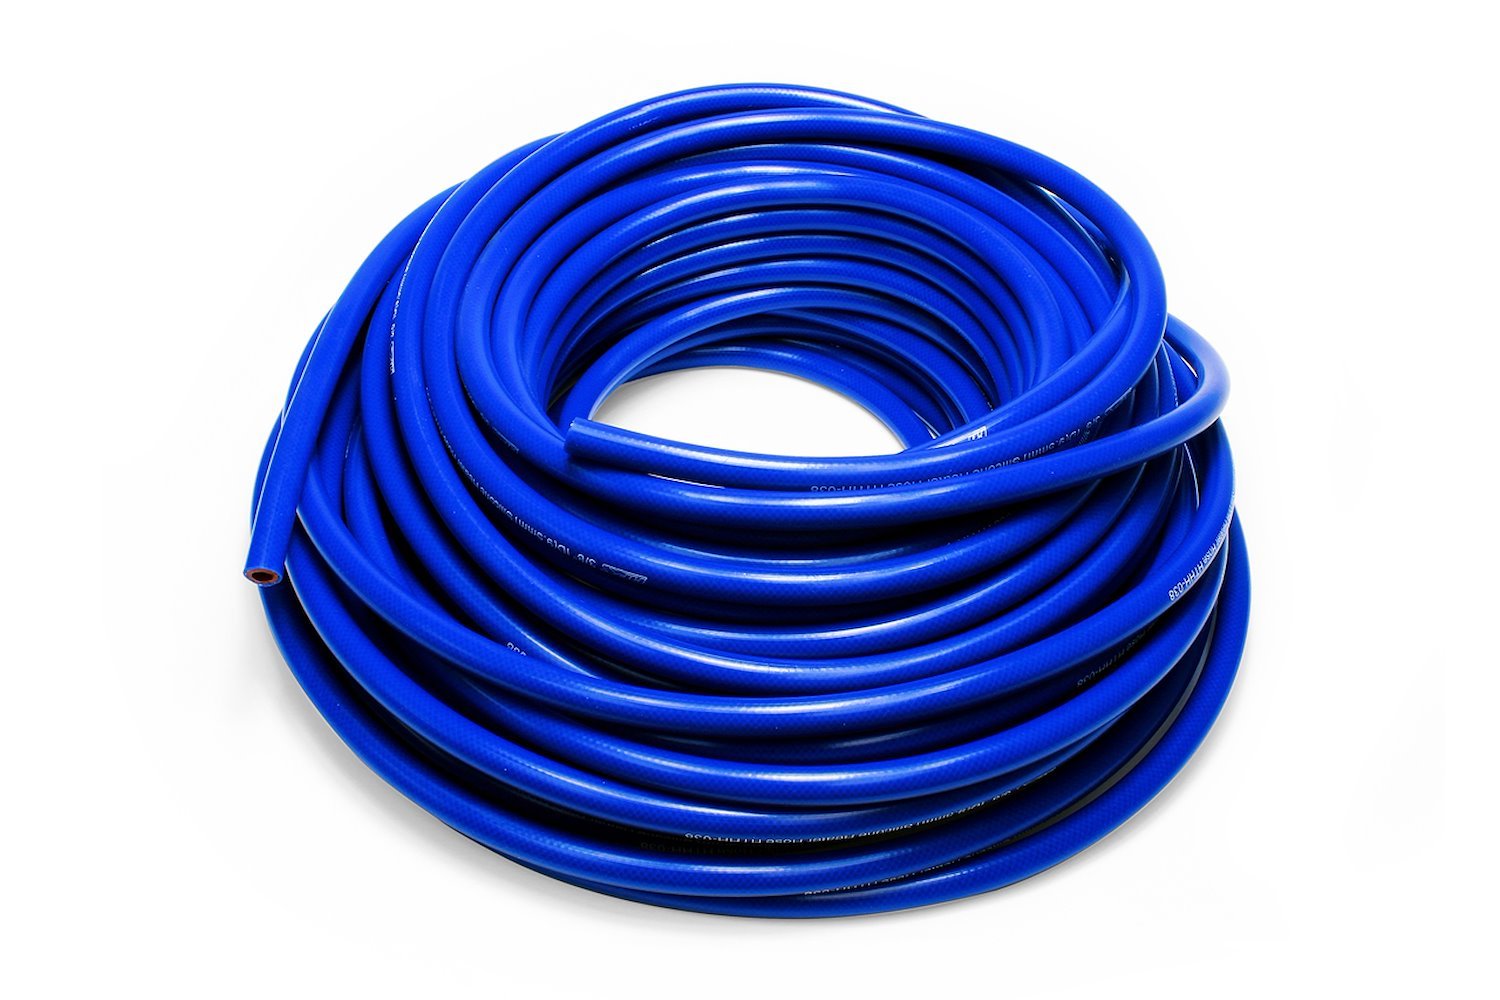 HTHH-013-BLUEx100 Silicone Heater Hose Tubing, High-Temp Reinforced, 1/8 in. ID, 100 ft. Roll, Blue